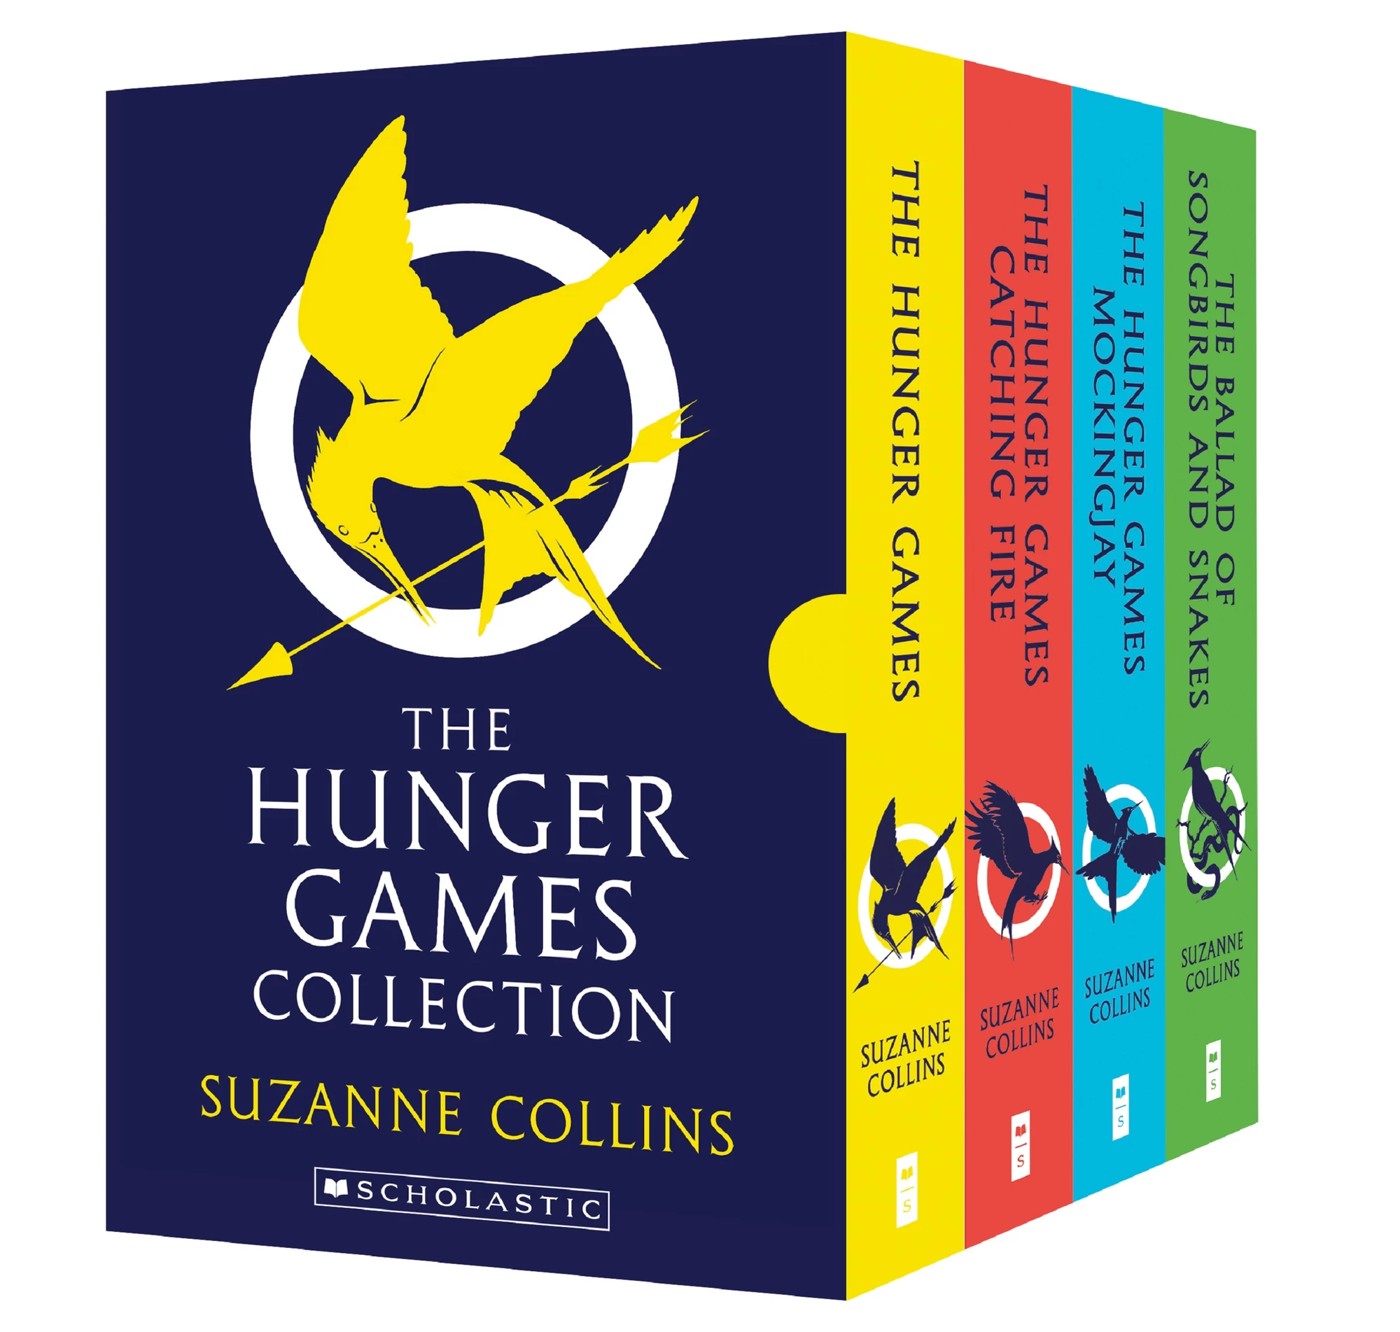 The Hunger Games: (The Hunger Games) by Suzanne Collins